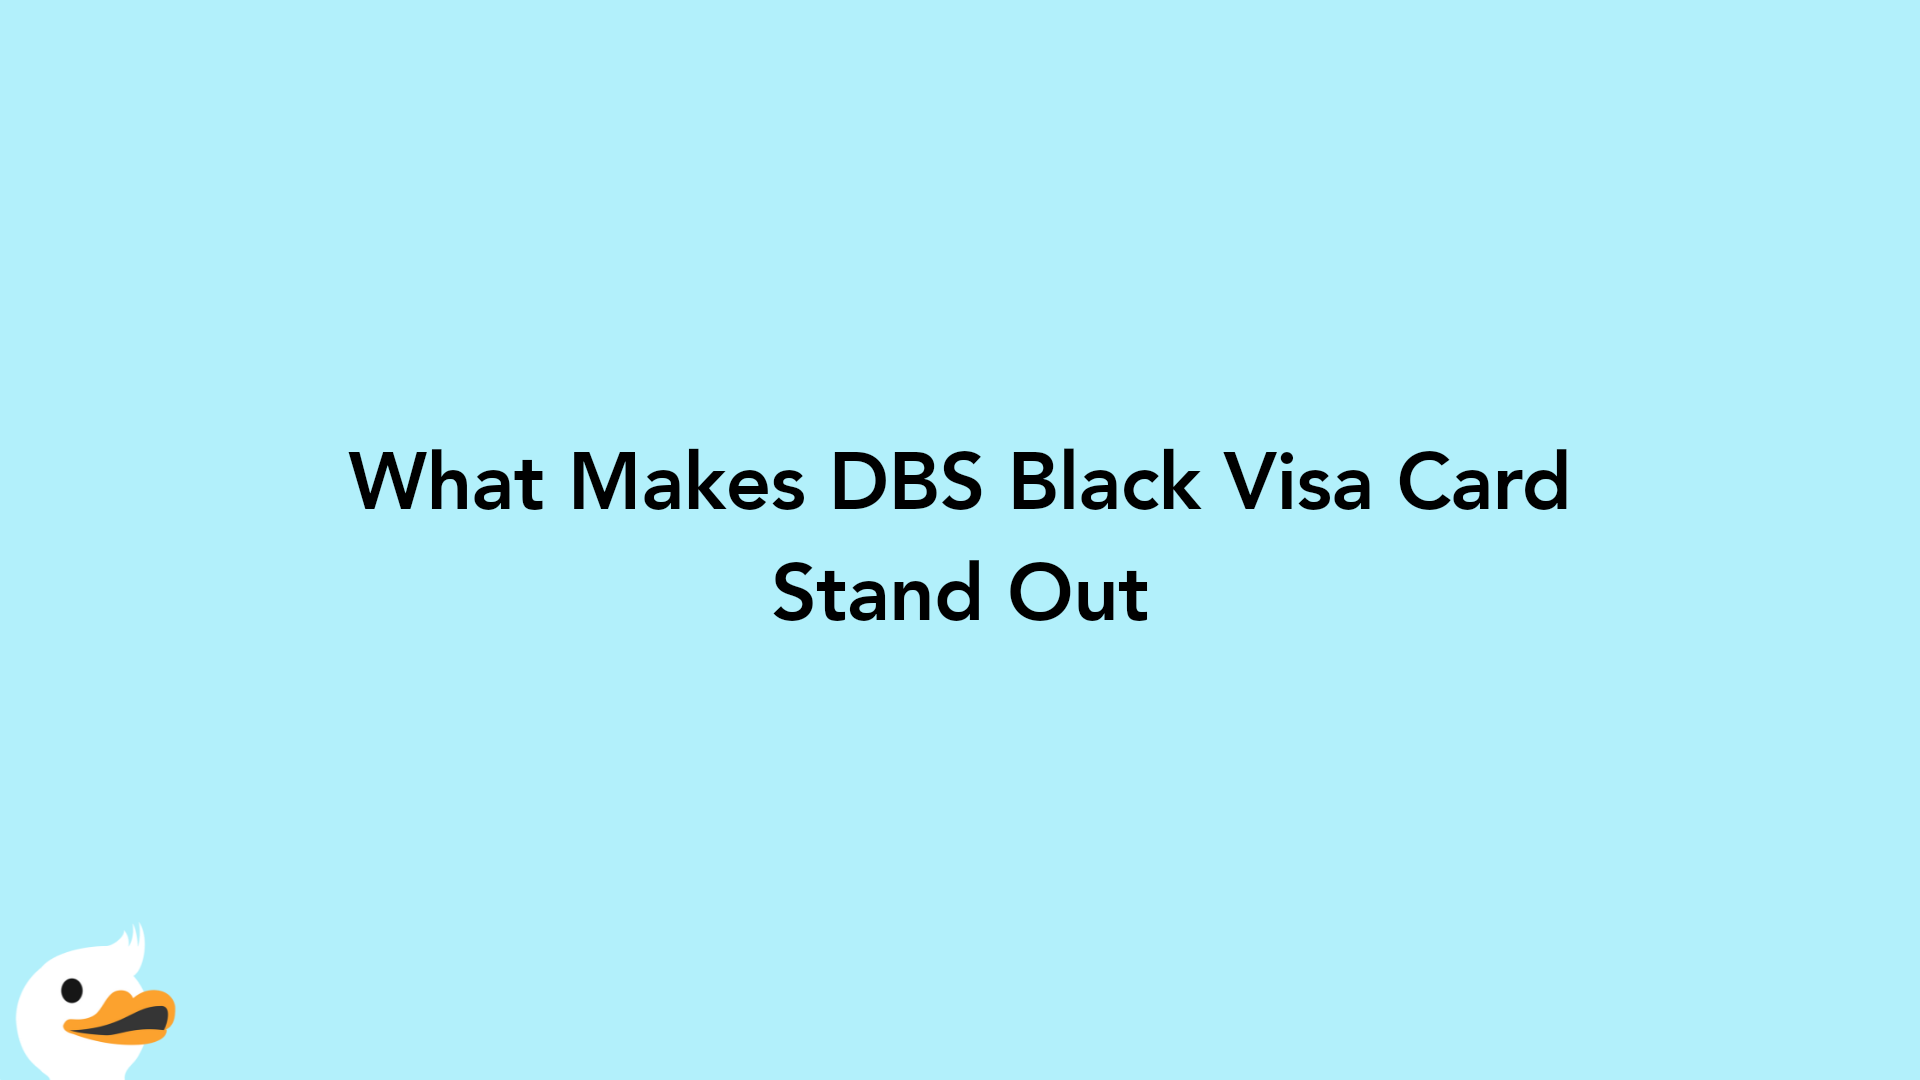 What Makes DBS Black Visa Card Stand Out